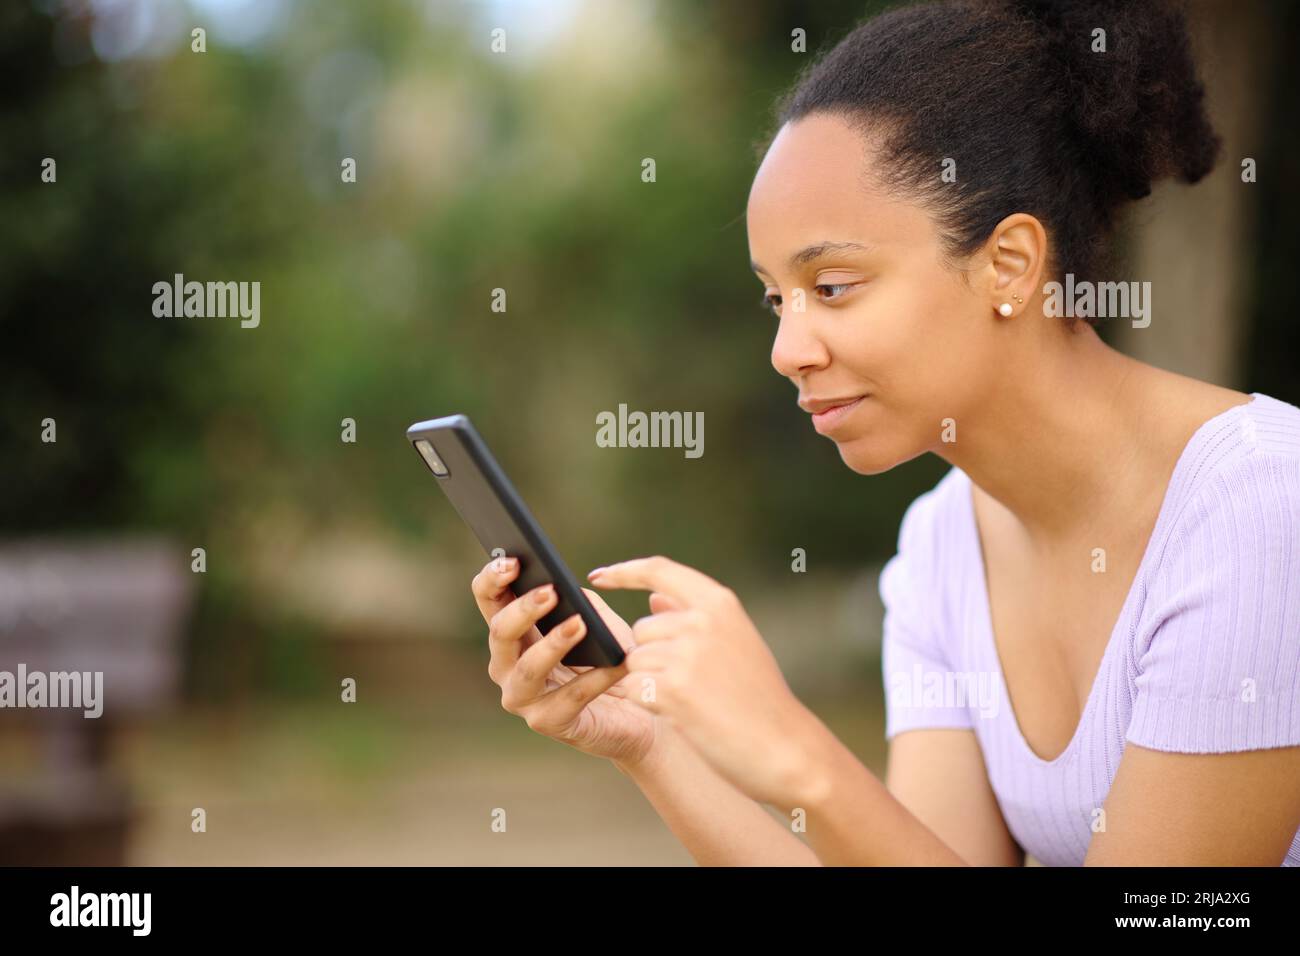 Profile of a black woman using smart phone sitting in a park Stock Photo